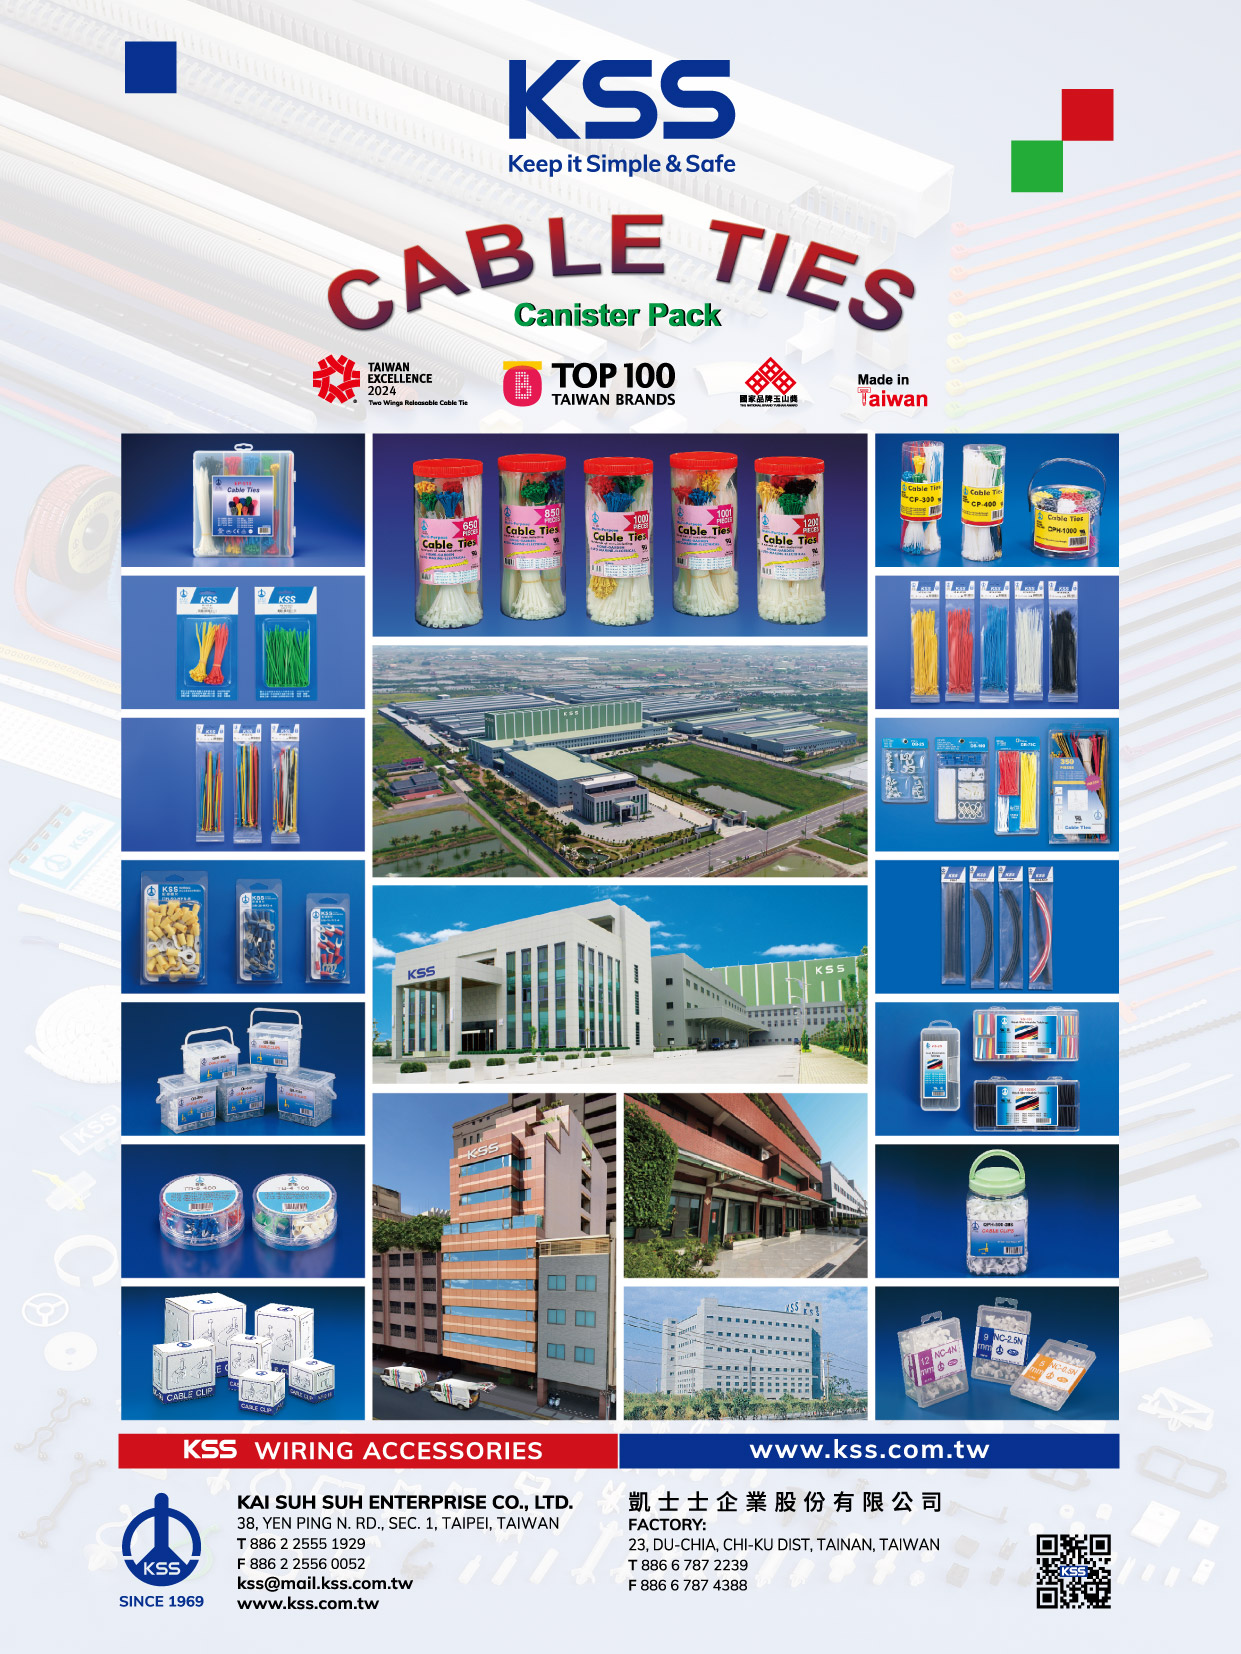 KAI SUH SUH ENTERPRISE CO., LTD. (KSS) , Wiring Ducts, Cable Markers, Cable Ties, Wrapping Bands, Cable Clamps, Glands, Conduits, Bushings, Wire Connectors, Tubes, Cable clips, PCB Parts, Fasteners, Value Pack, Heat-Shrinkable Tubings, Terminal, Tool, RJ45 Modular Plug And Plug Cover, U Connector